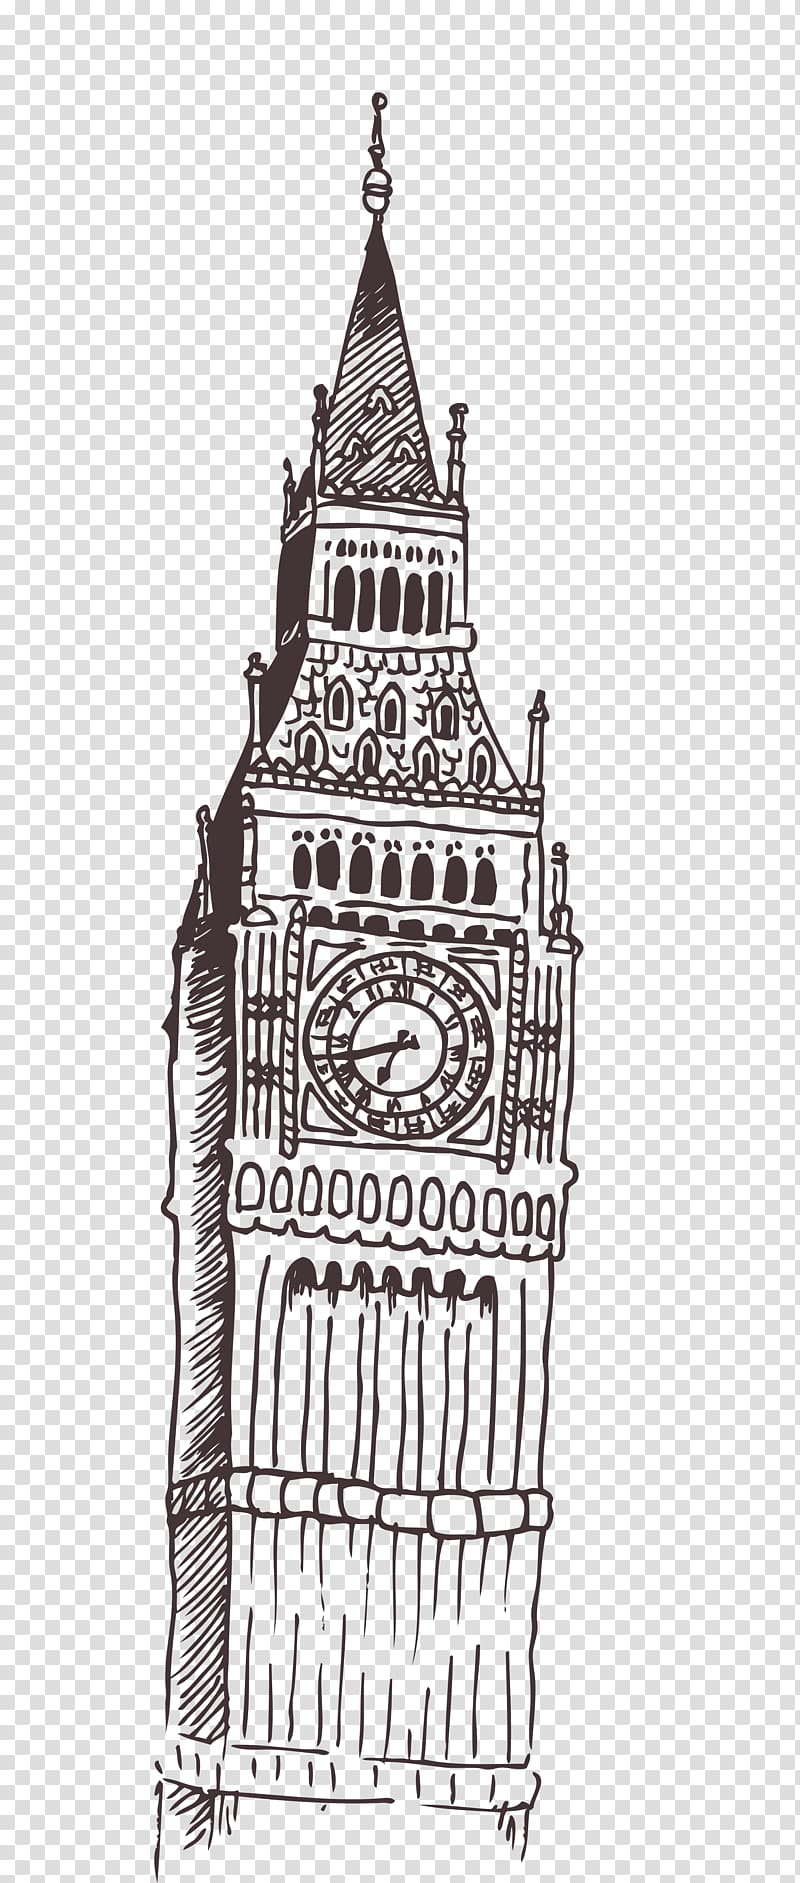 clock tower illustration, Big Ben Tower of London Computer file, London clock tower transparent background PNG clipart